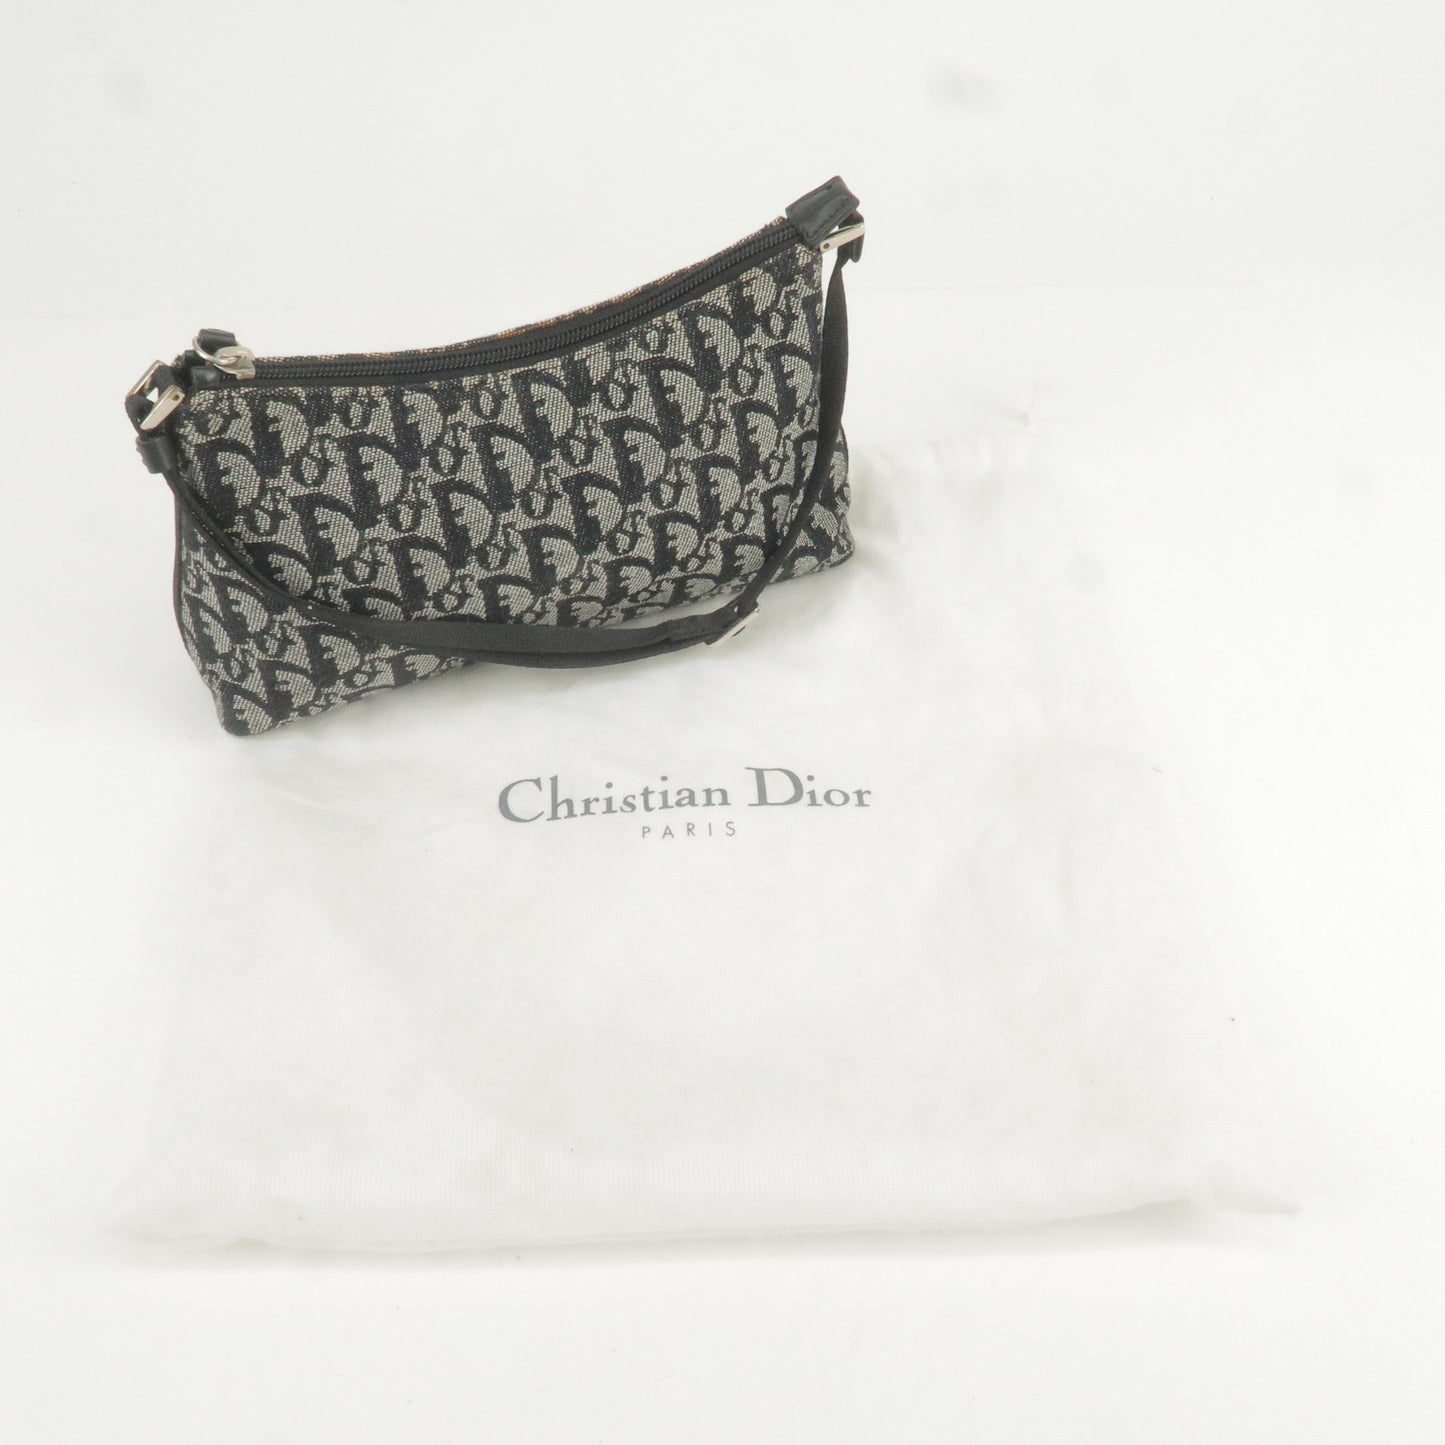 Christian Dior Trotter Canvas Leather Pouch Hand Bag Black